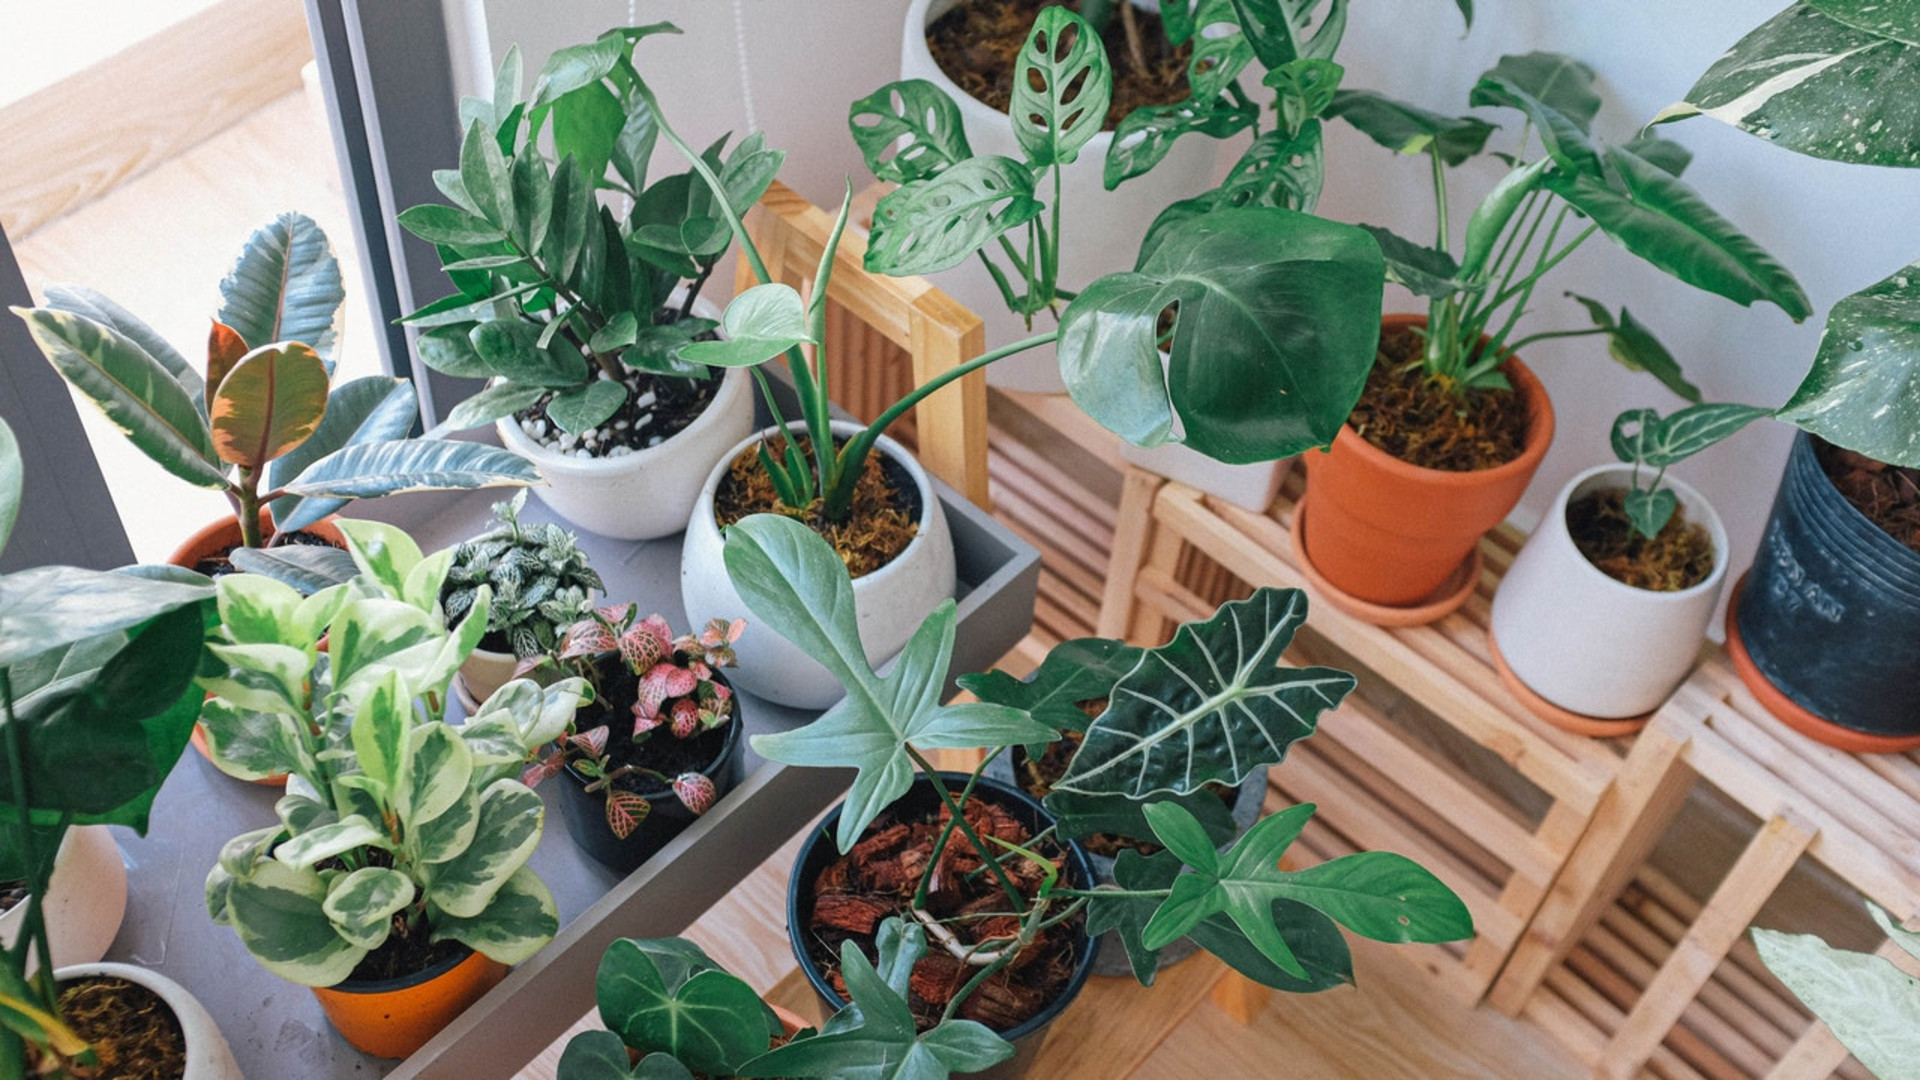 How To Care For Your Houseplants in The Spring